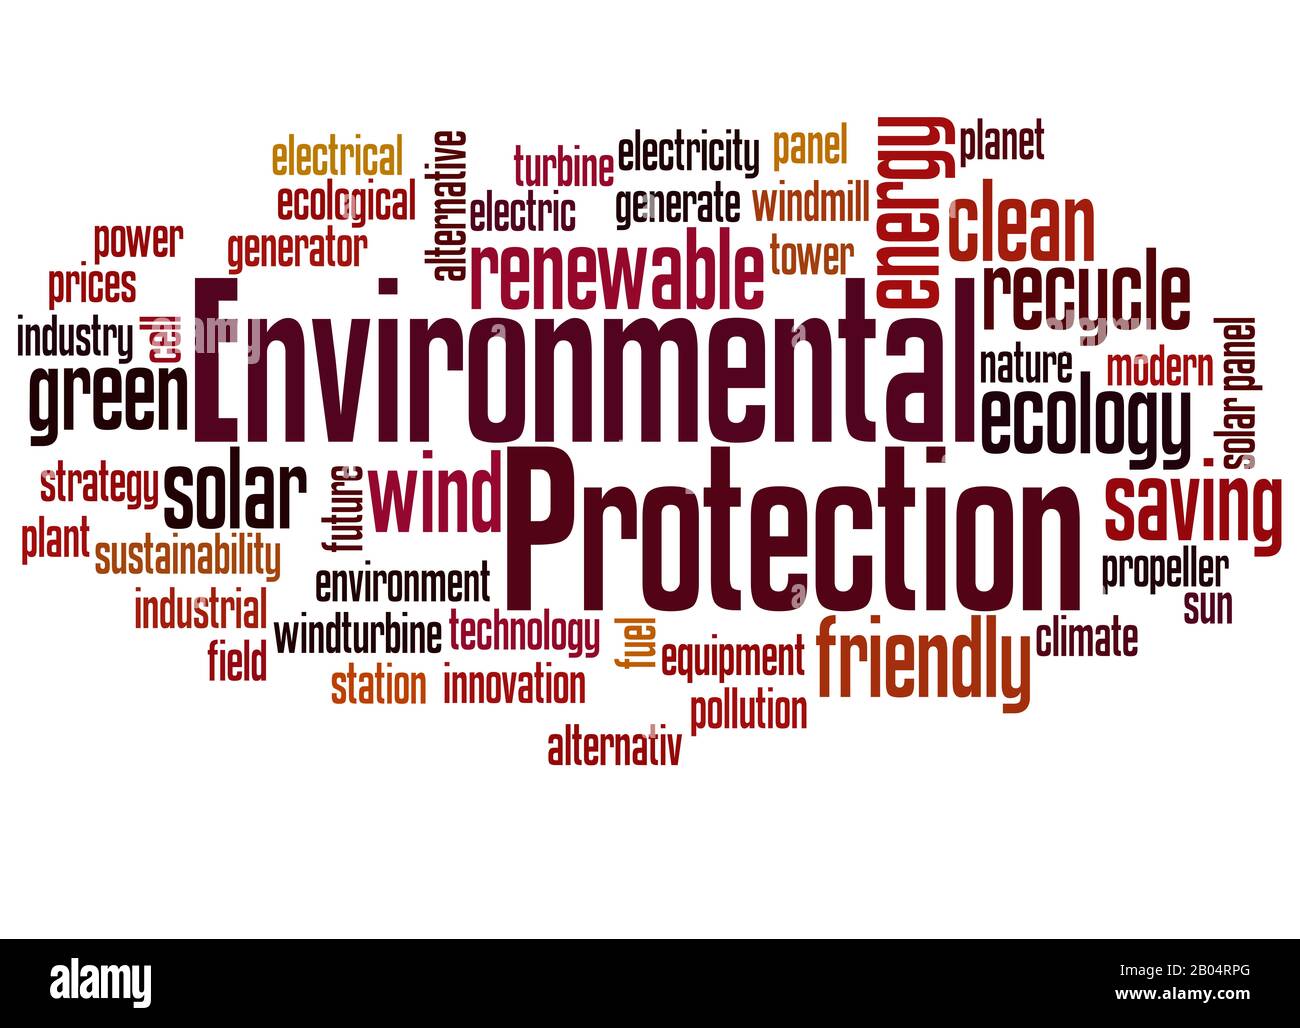 Environmental protection word cloud concept on white background. Stock Photo